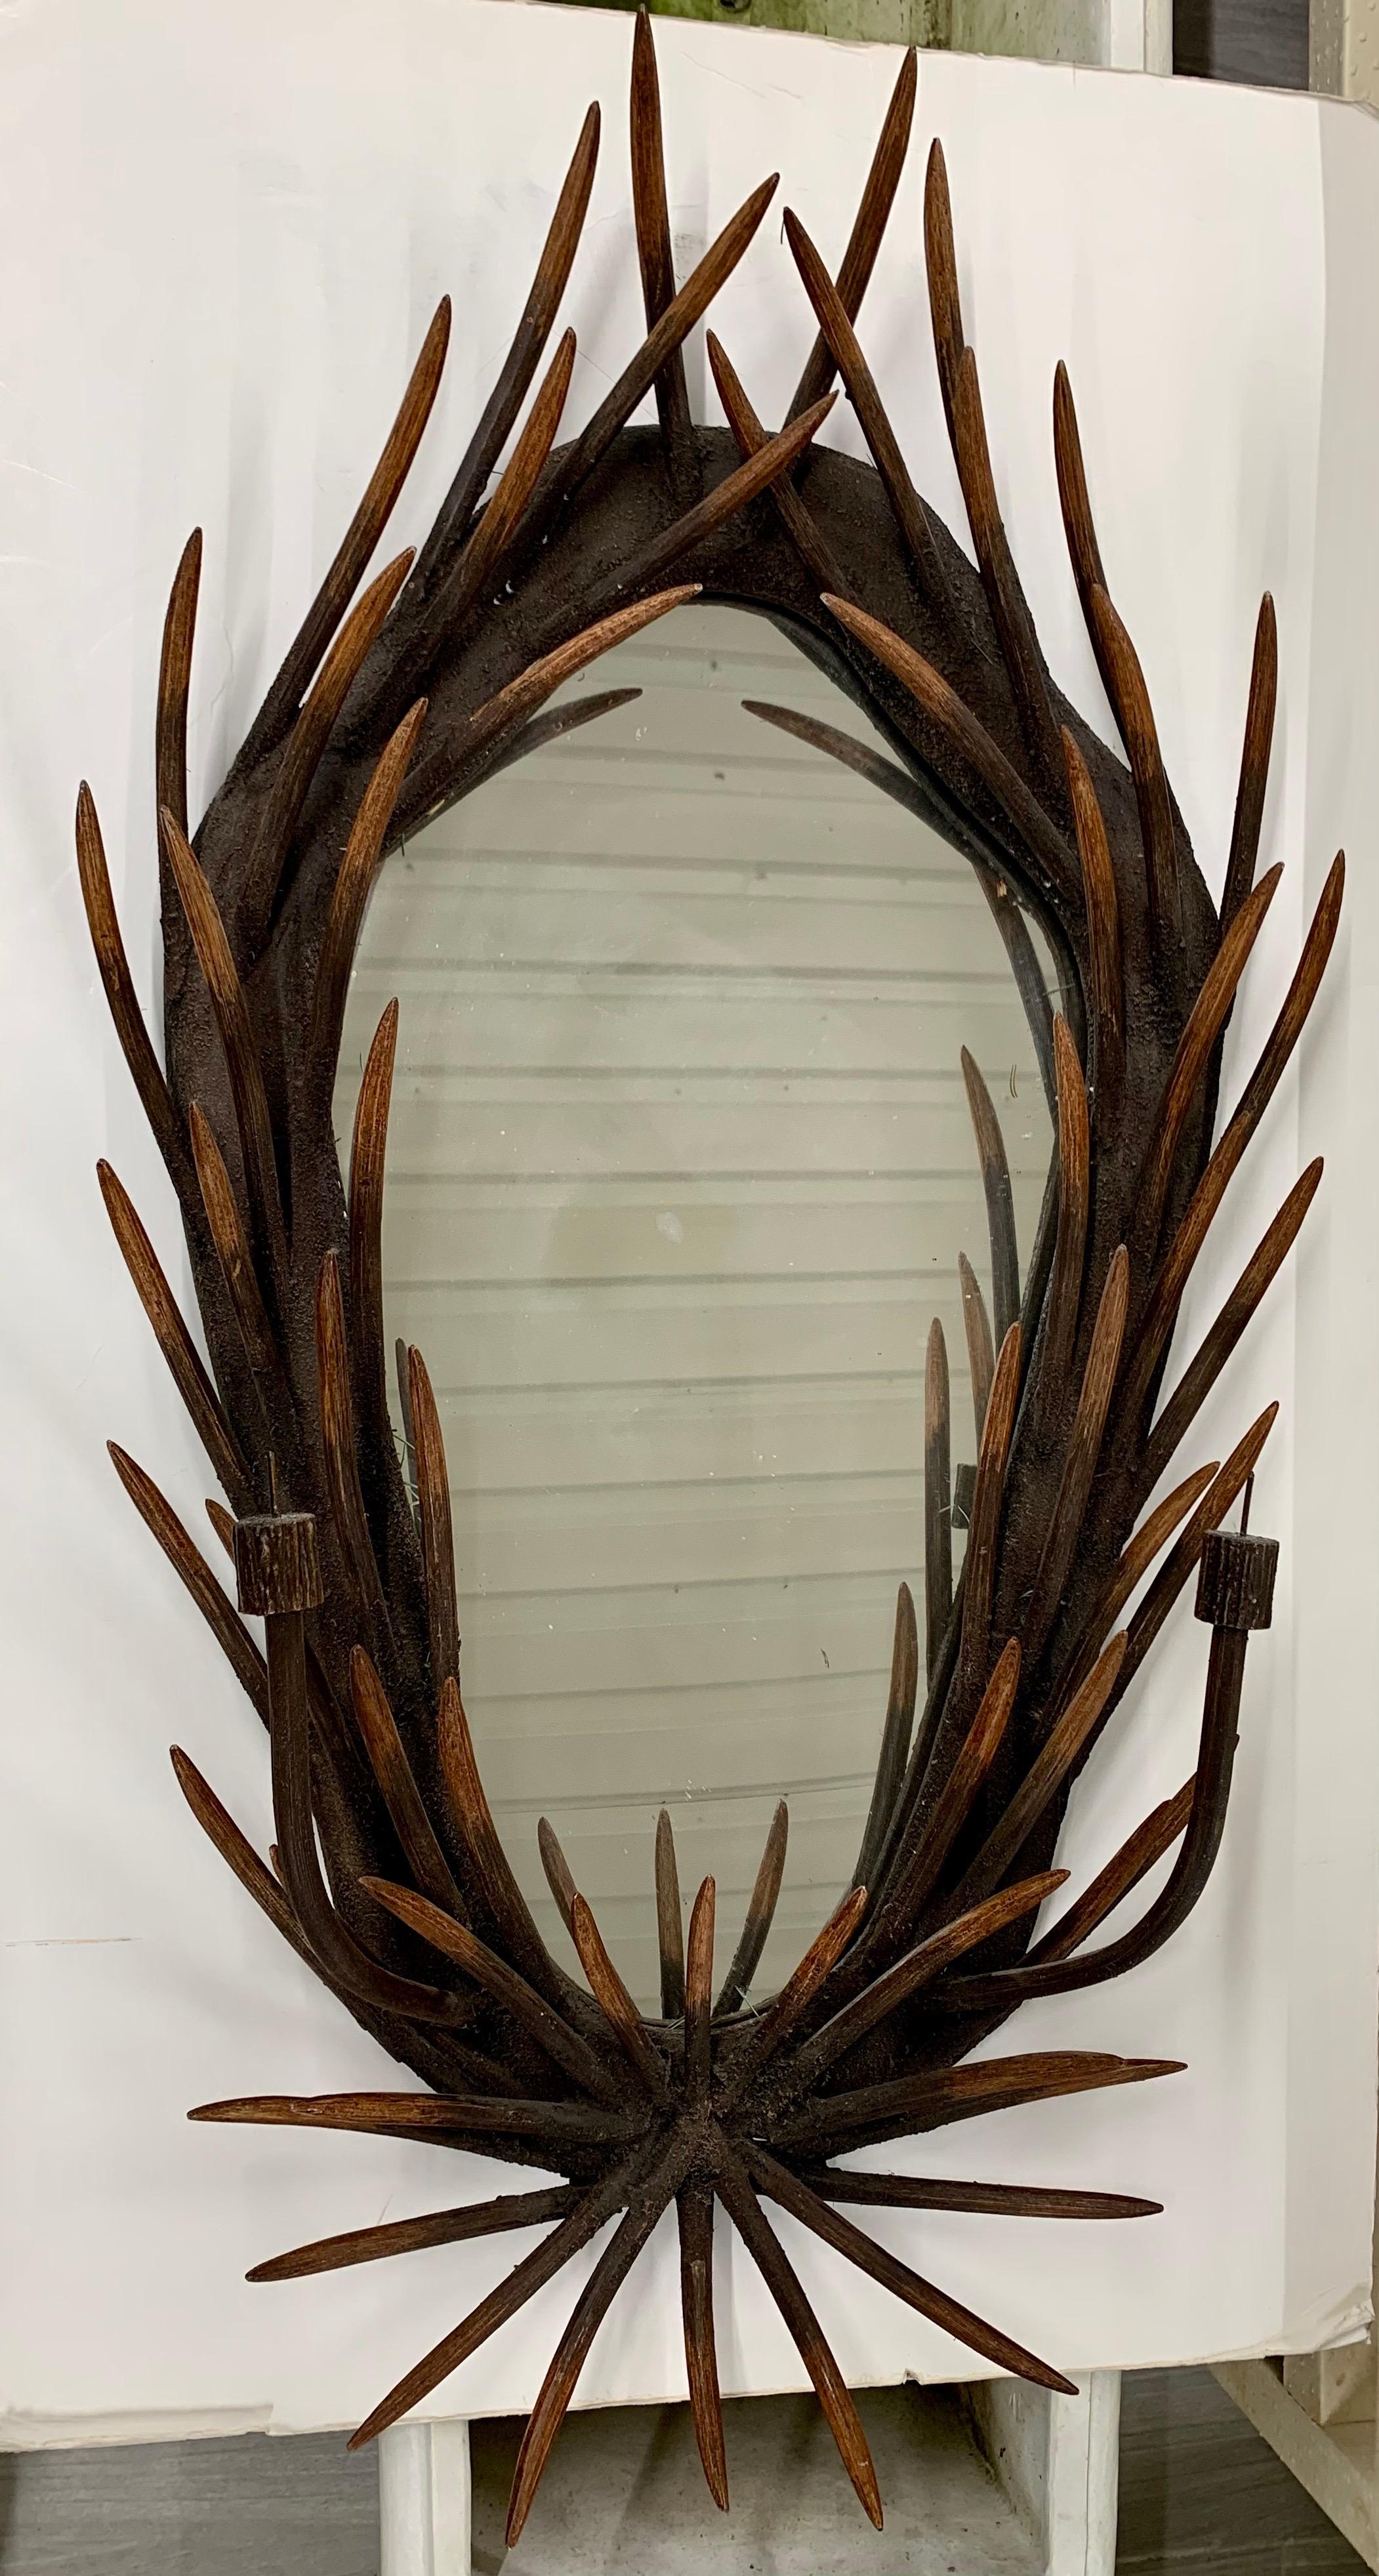 Unique oval wall mirror is comprised of carved wood made to look like deer antlers surrounding an oval mirror. Each side has an iron candleholder.